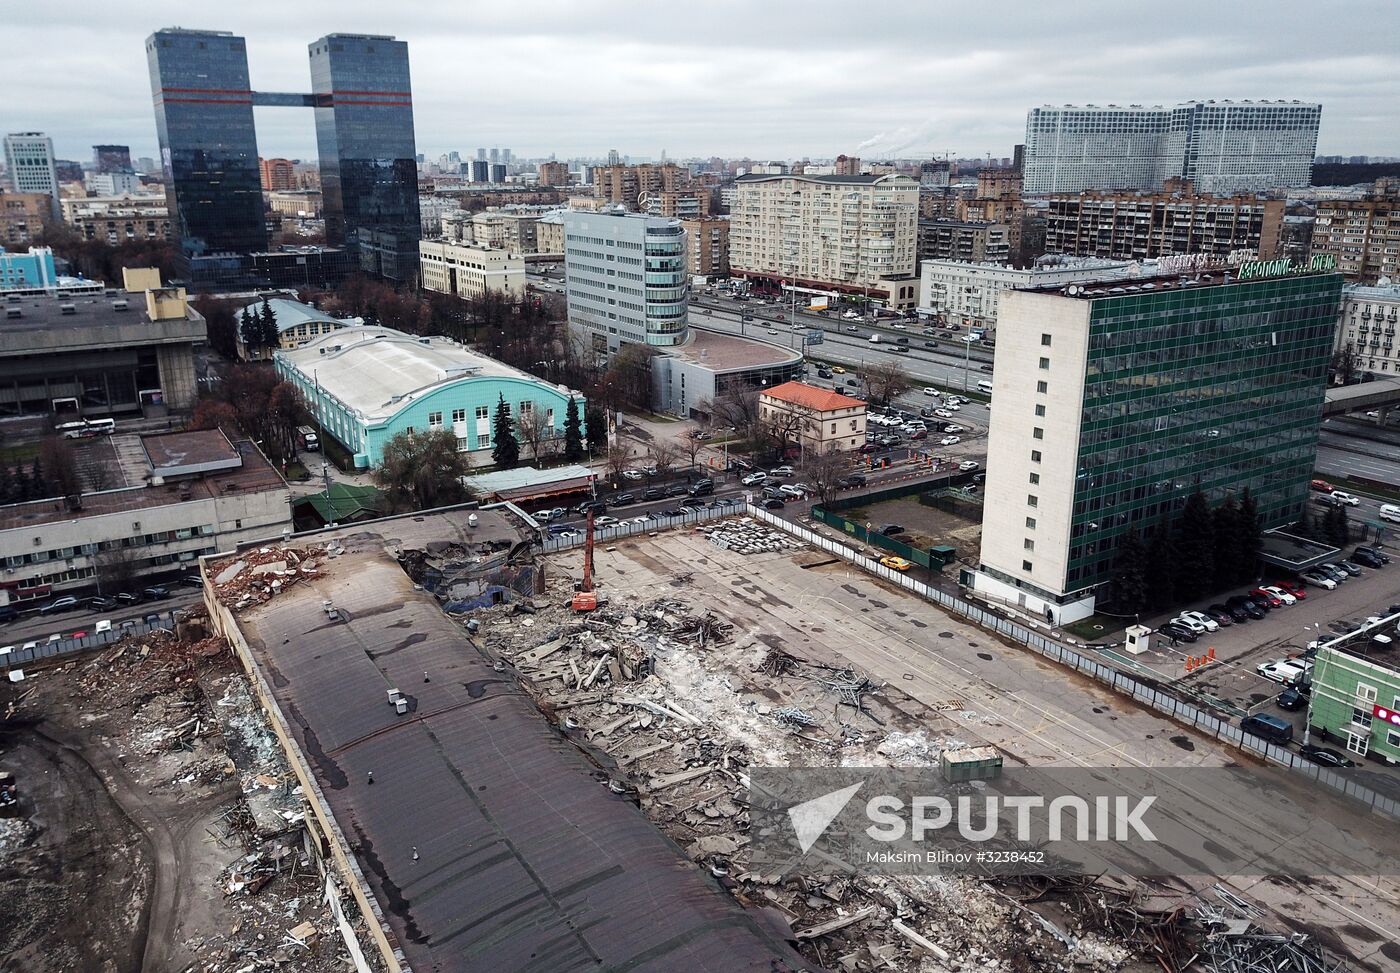 Moscow Air Terminal demolished